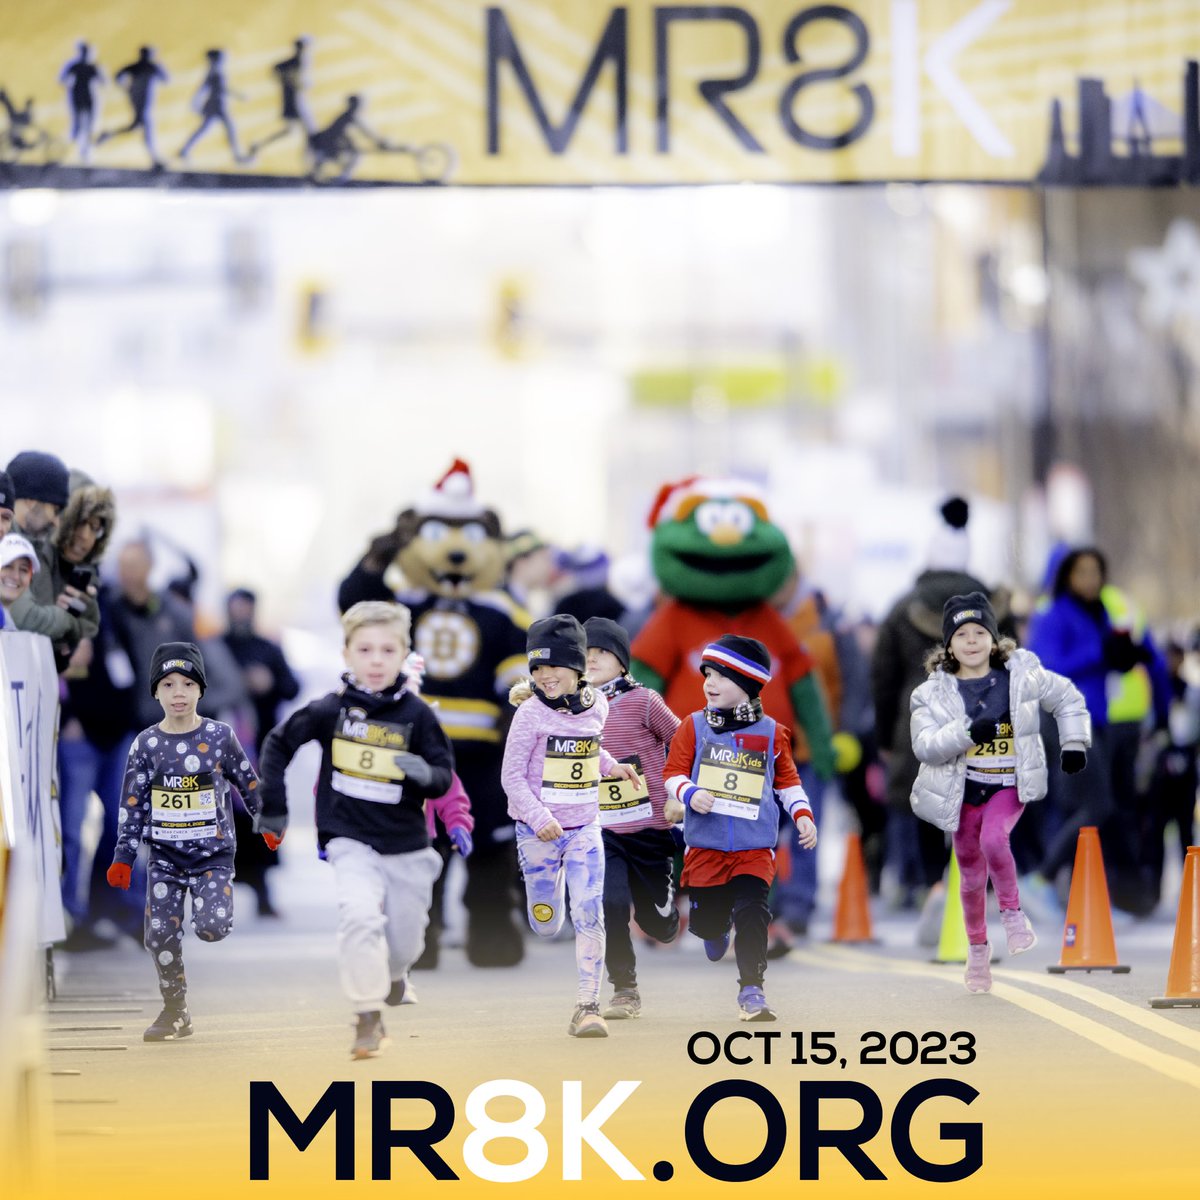 Looking for a great race for the whole family? Look no further than the MR8K! Open to runners and walkers of all levels and ages, the MR8K will include kids races of various distances for runners ages 4 to 12. Kid’s Registration is $5 - Sign up today at MR8K.org